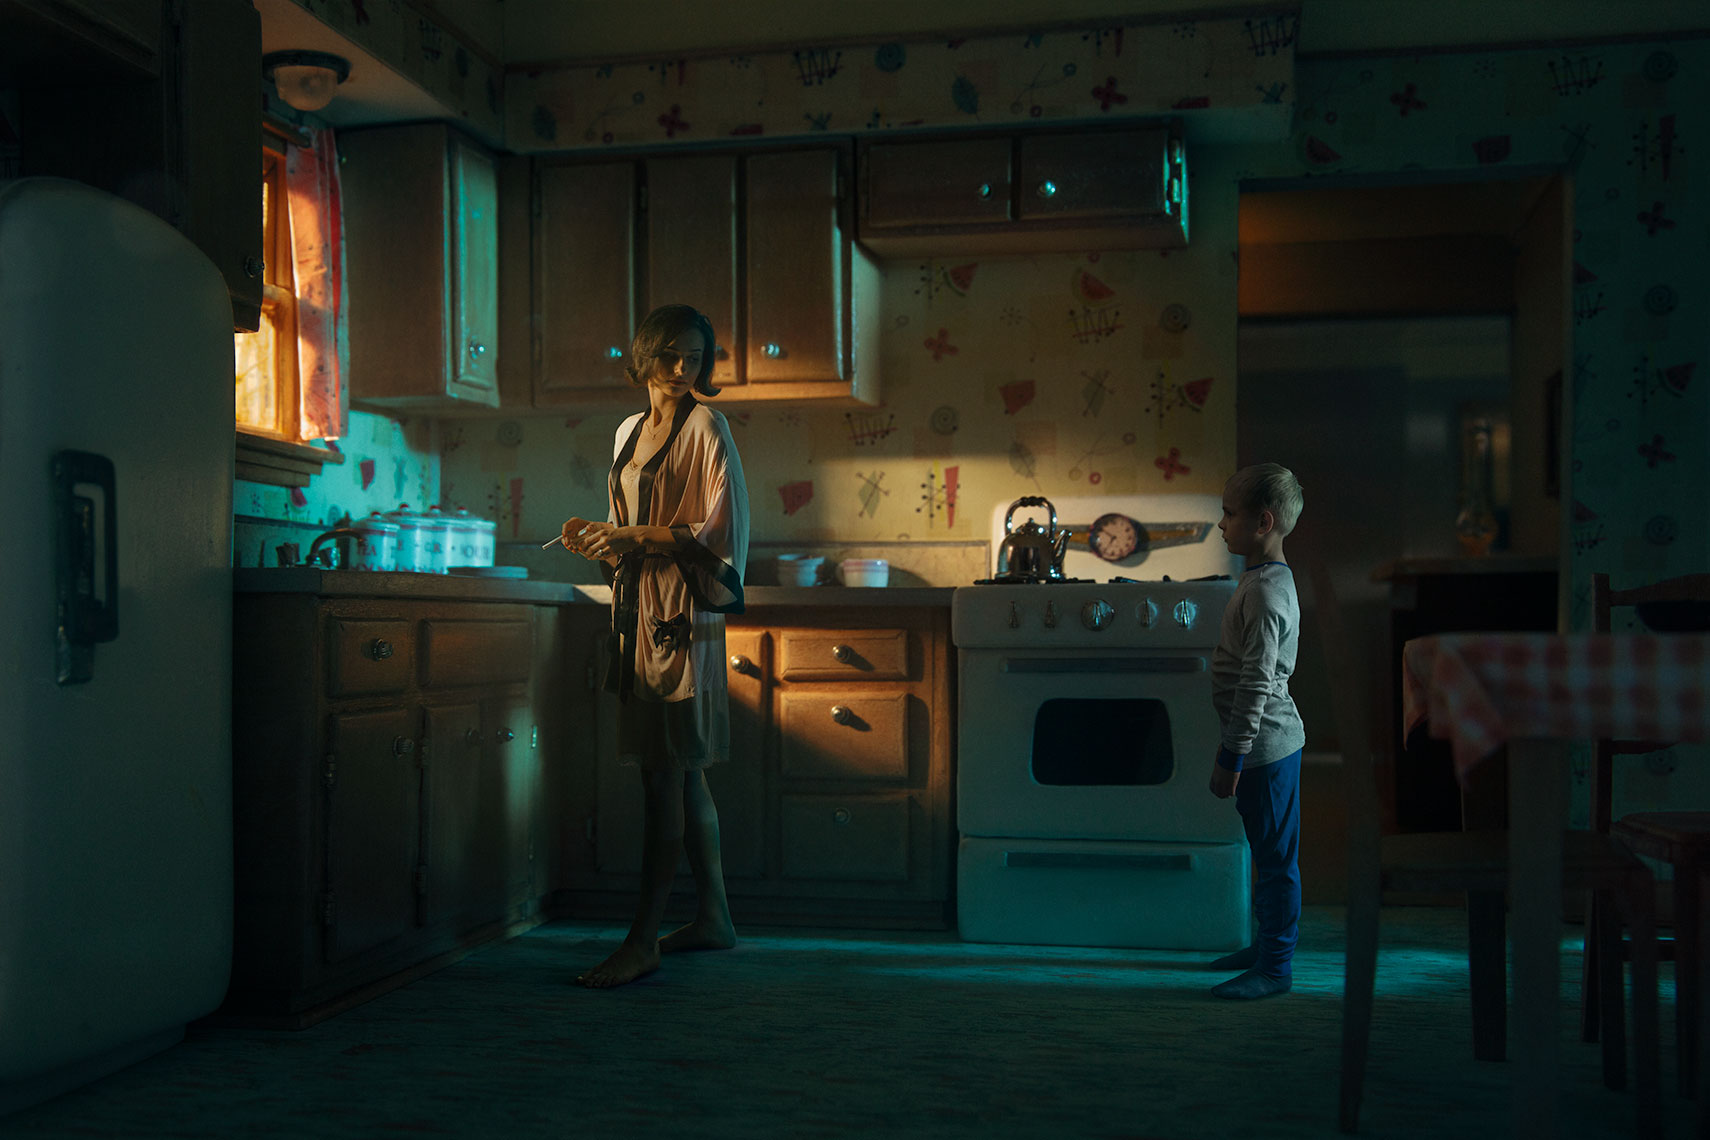 Moody photomontage of mother and young son in night clothes gazing at each other in early morning in sunlit 1960s’ kitchen miniature dollhouse set.